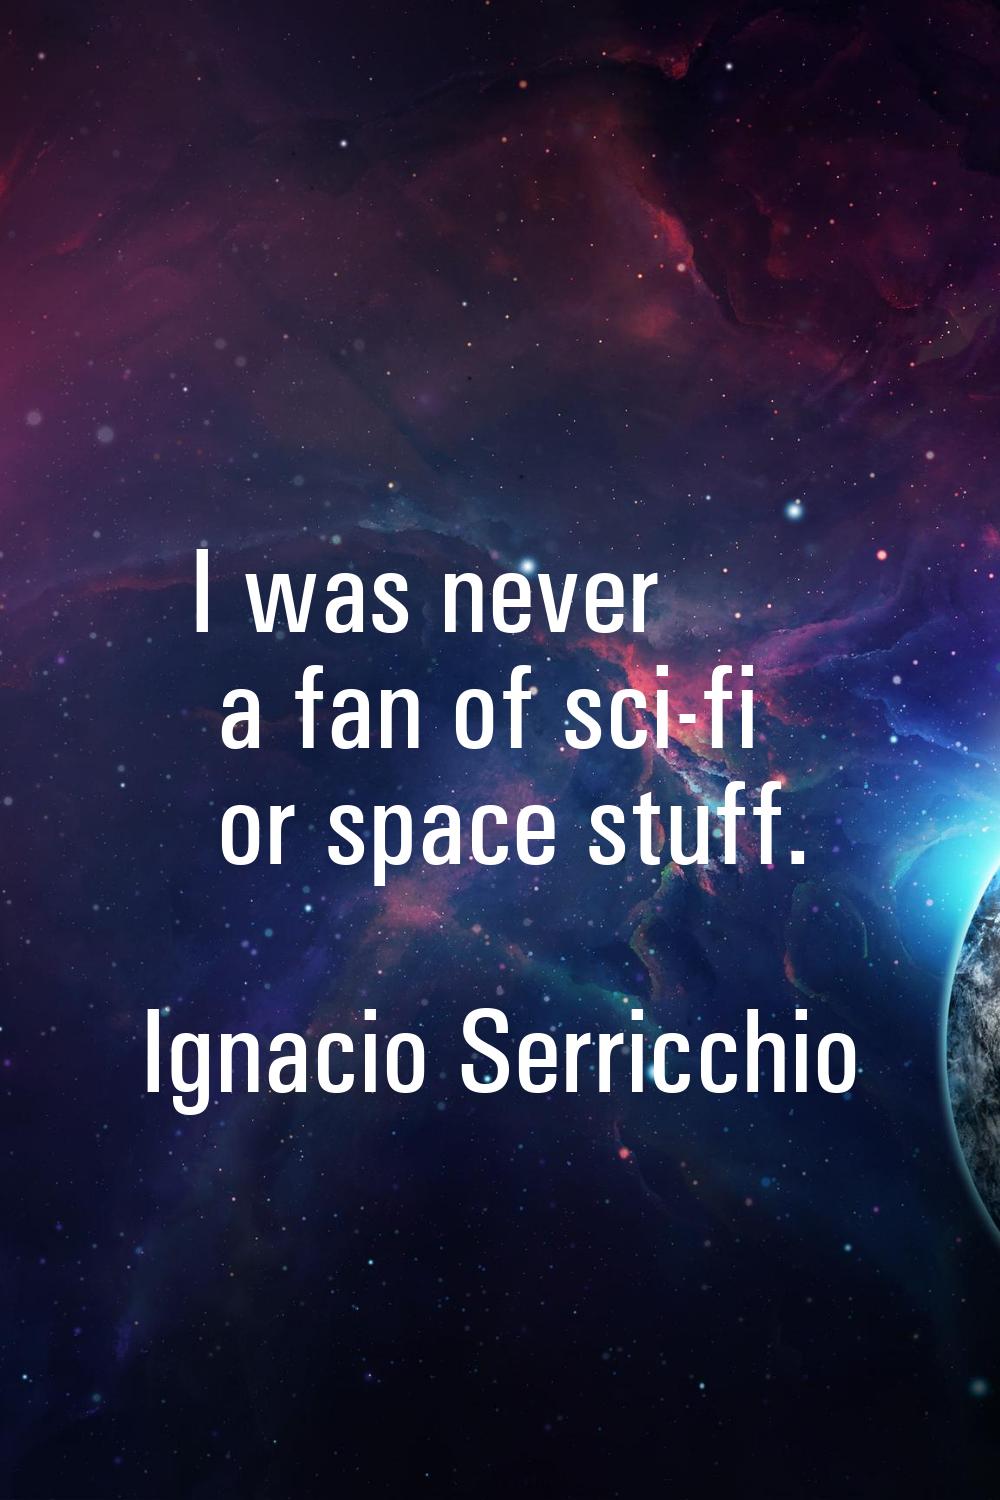 I was never a fan of sci-fi or space stuff.